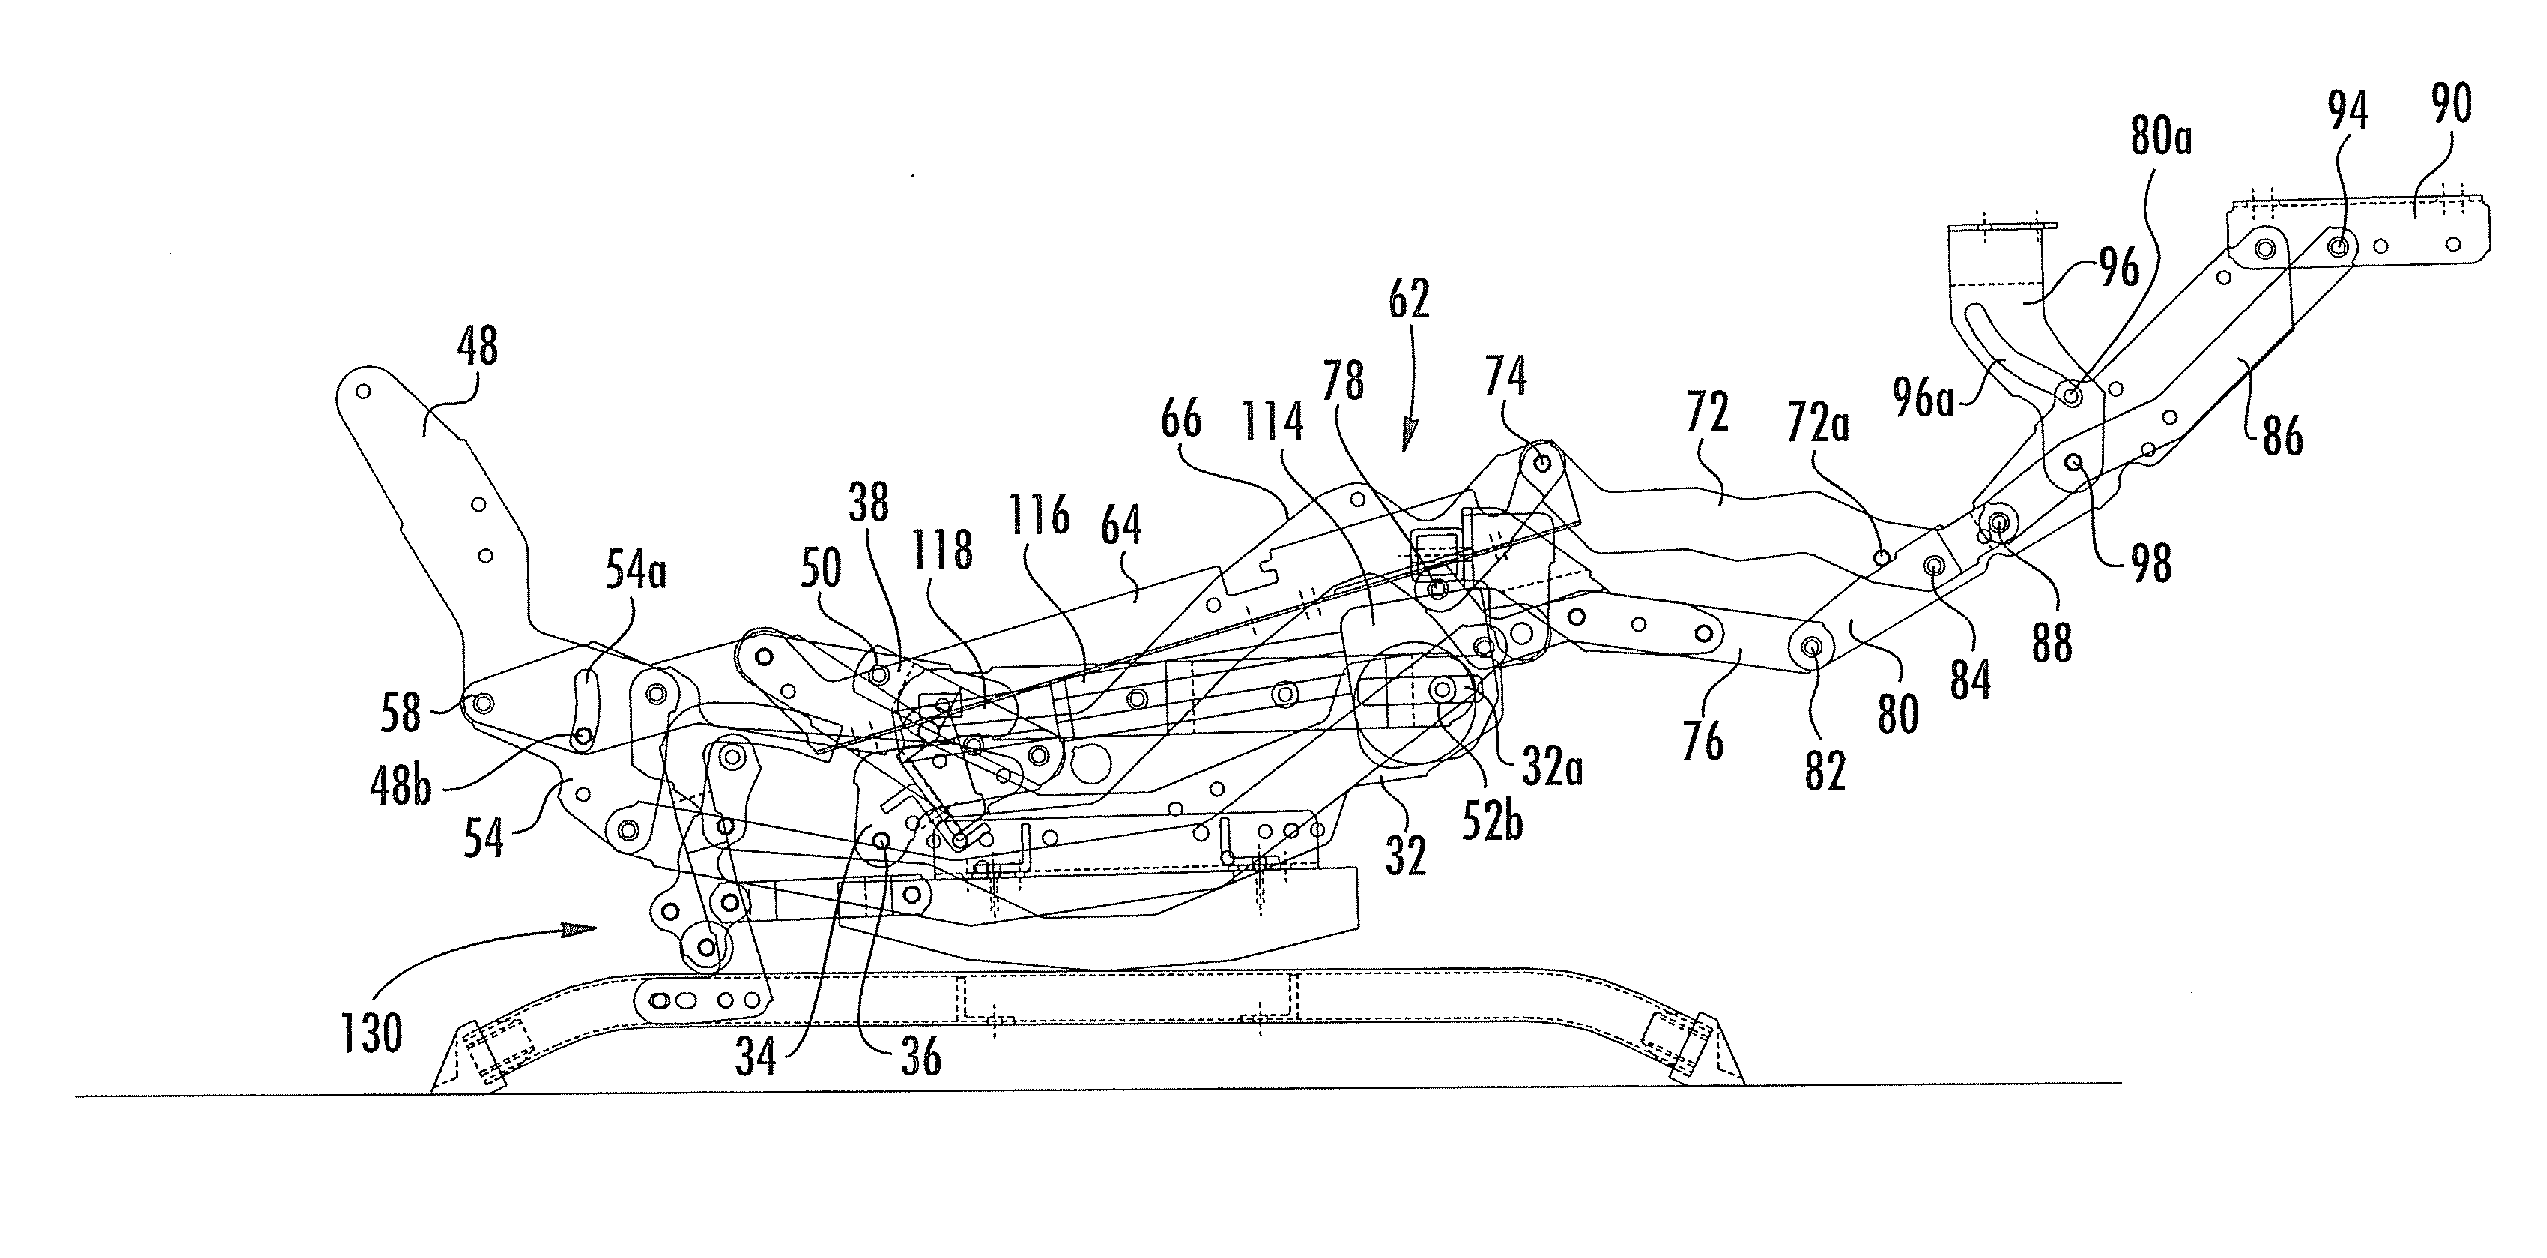 Locking unit for rocking-reclining seating unit with power actuator